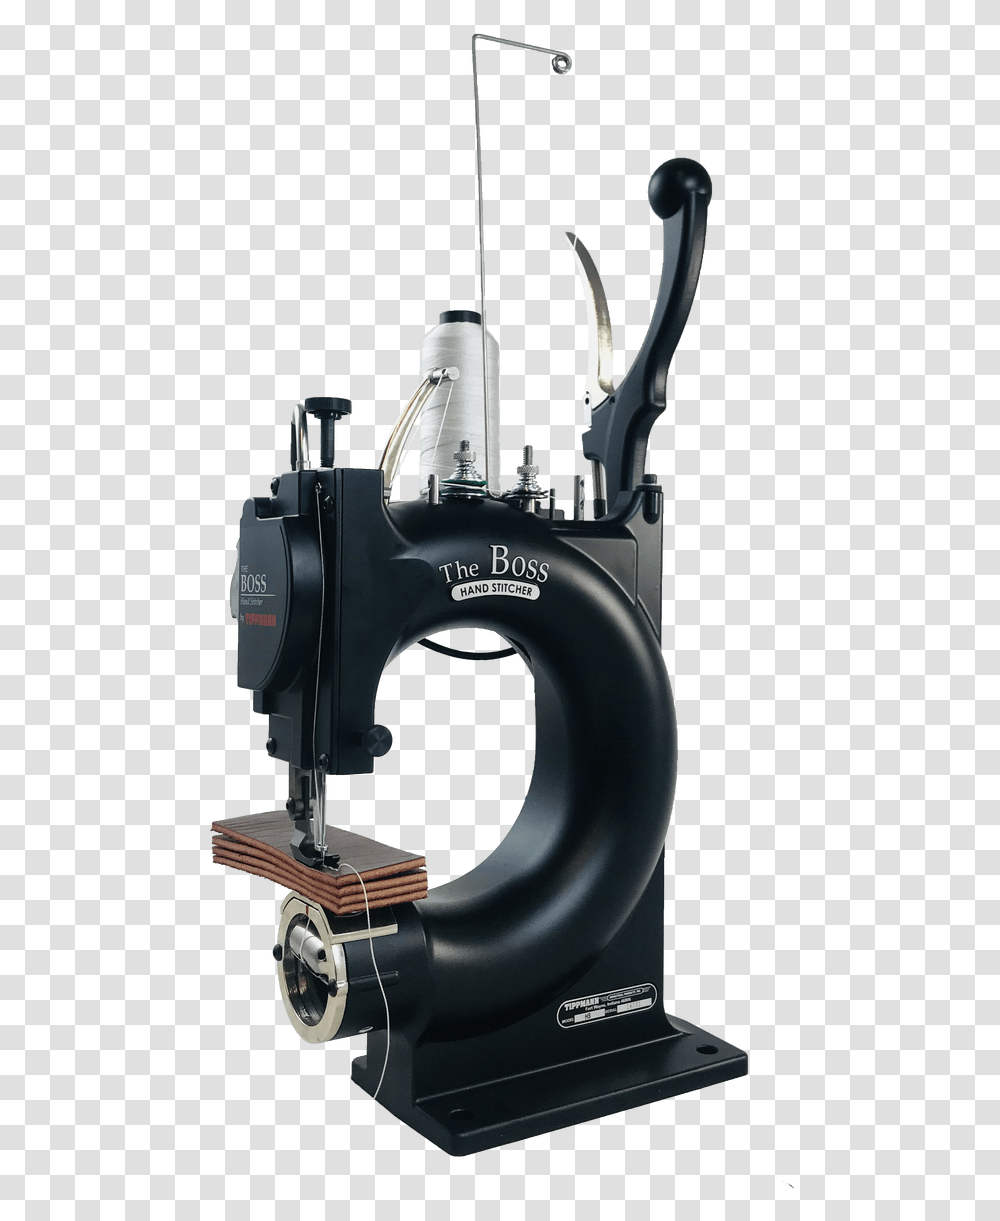 Machine, Sewing, Sewing Machine, Electrical Device, Appliance Transparent Png